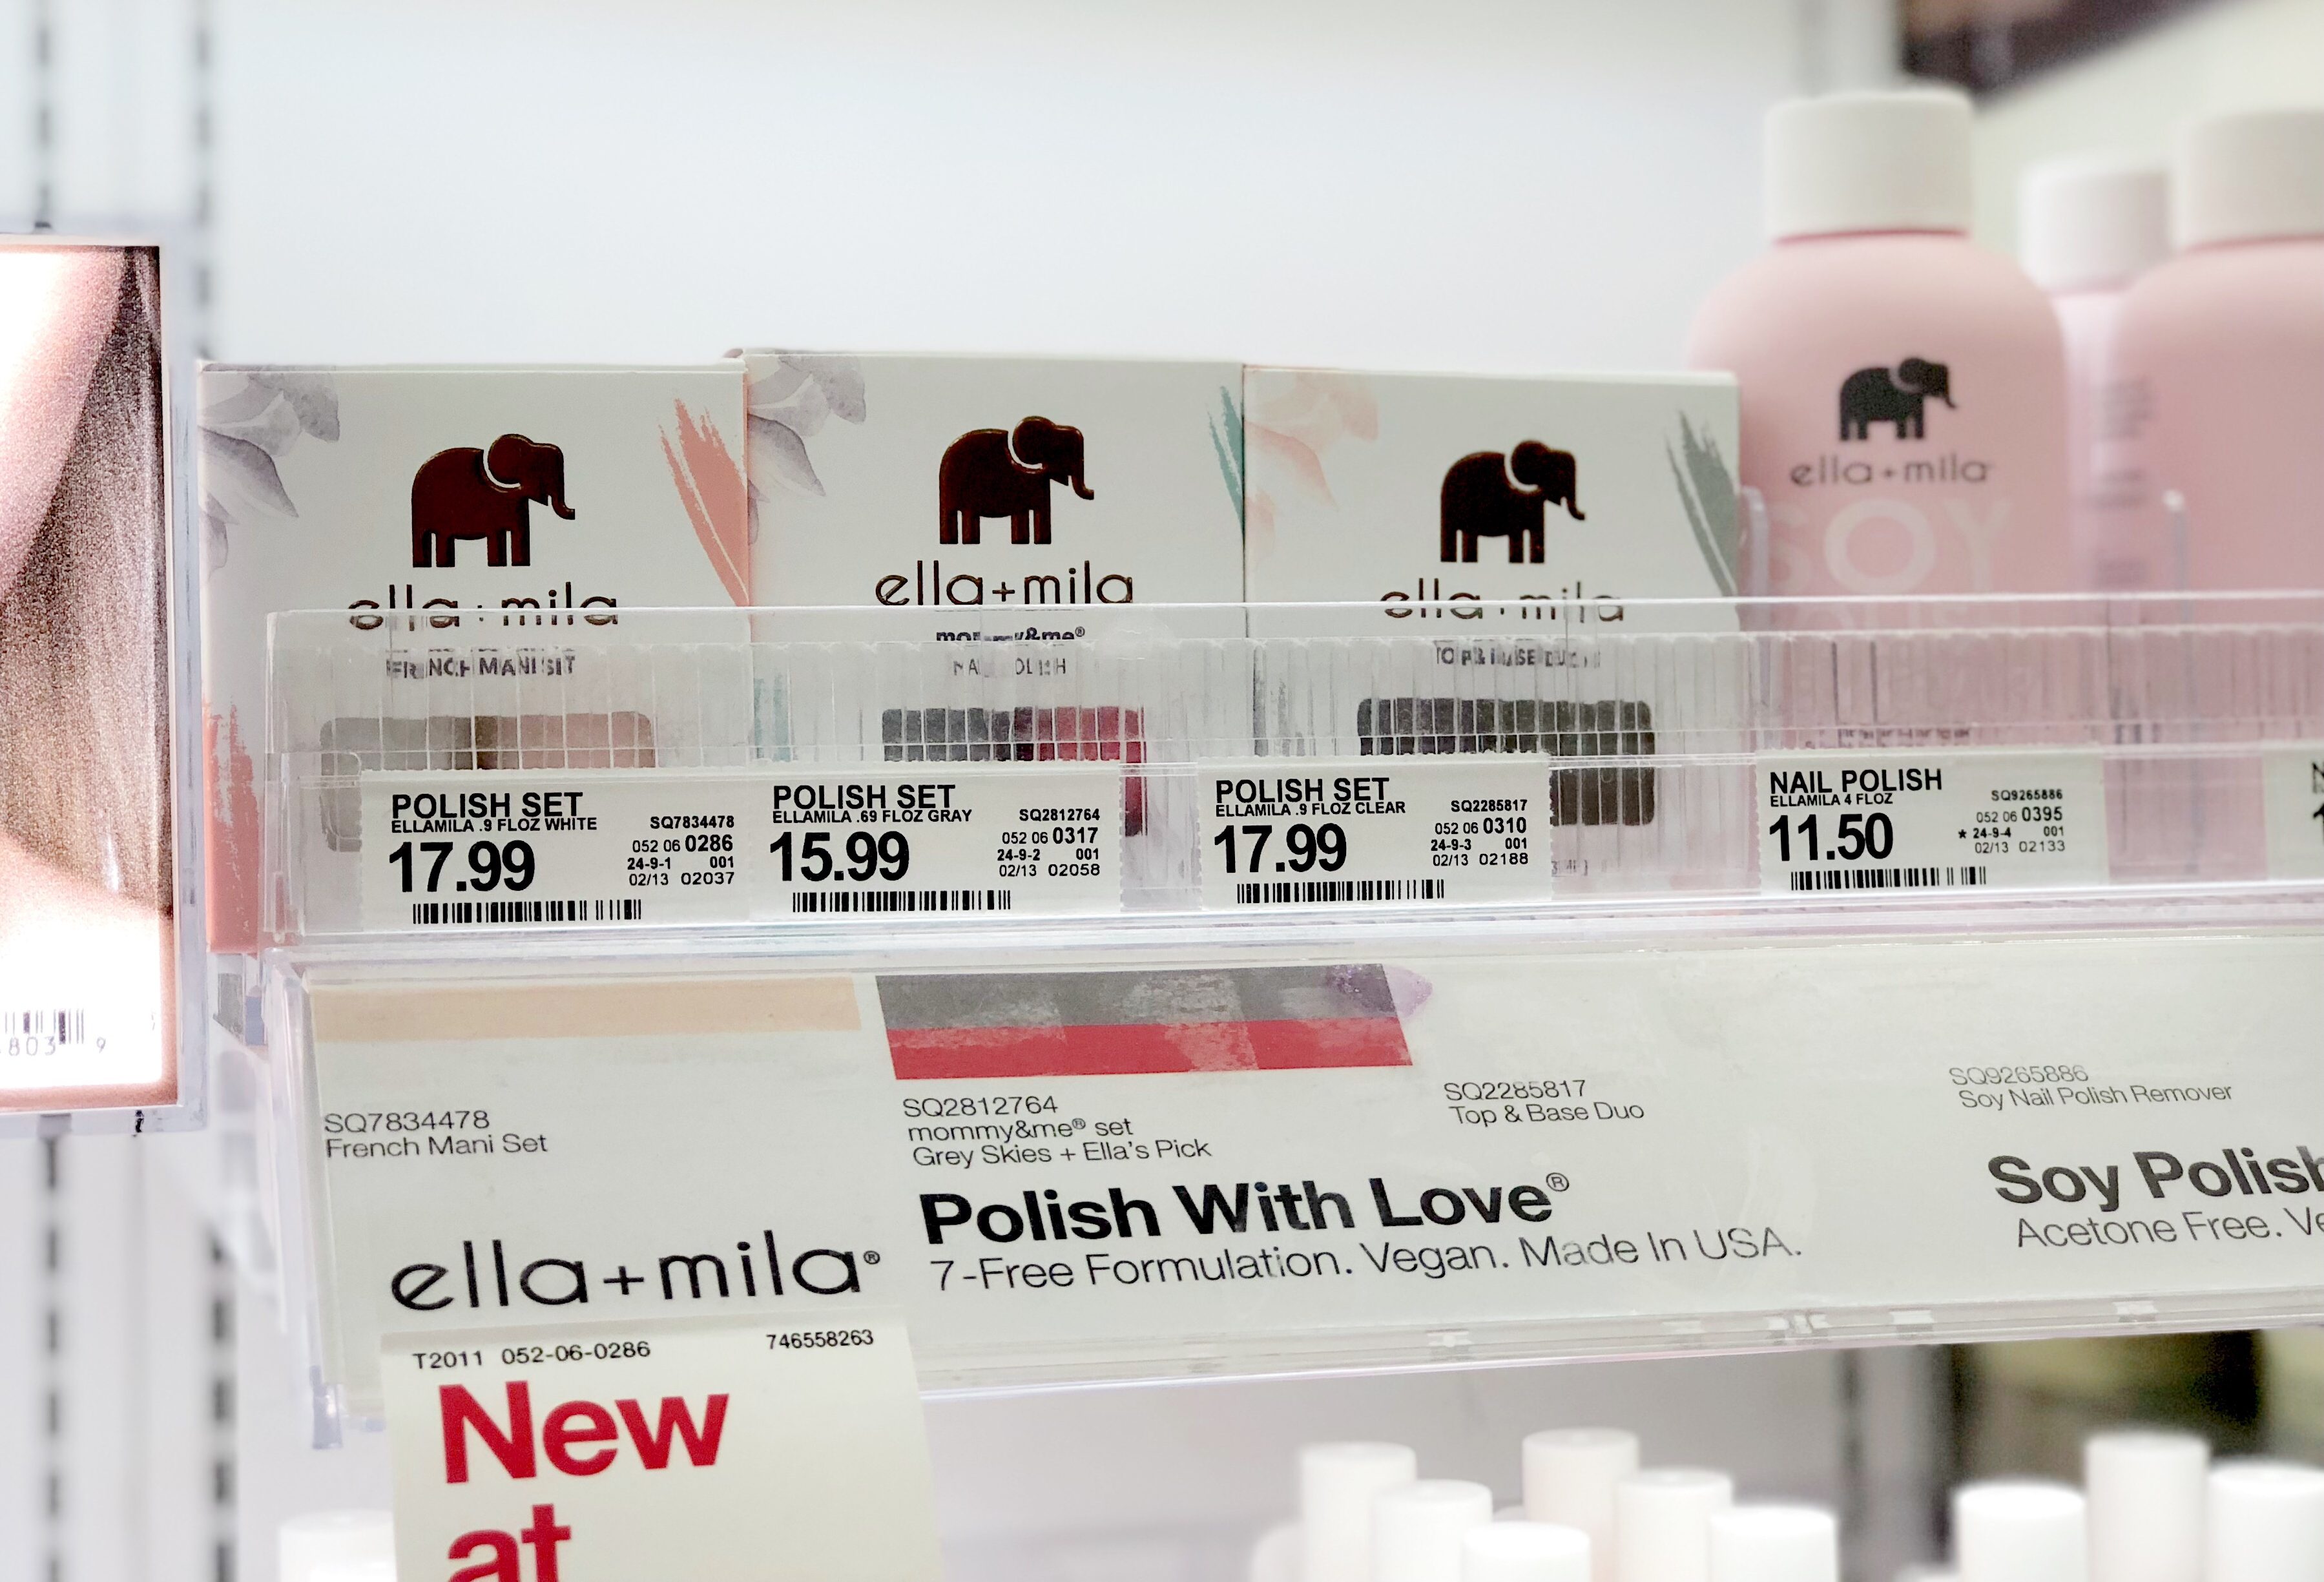 ella + mila nail products deal 3 -shelf comparison of Target prices